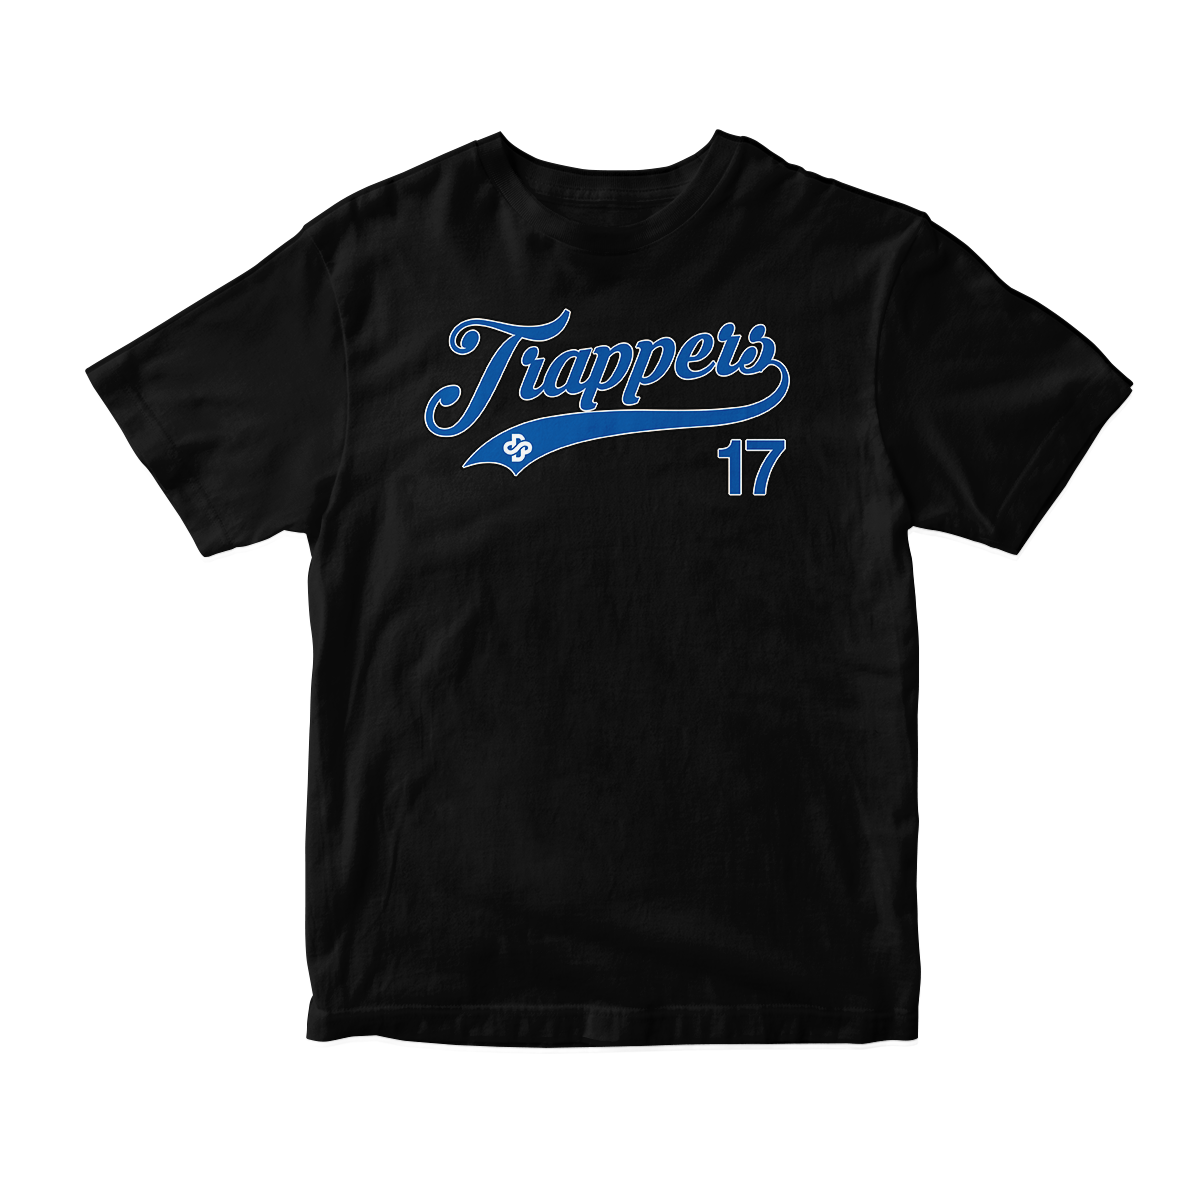 'Trappers' in Game Royal CW Unisex Short Sleeve Tee